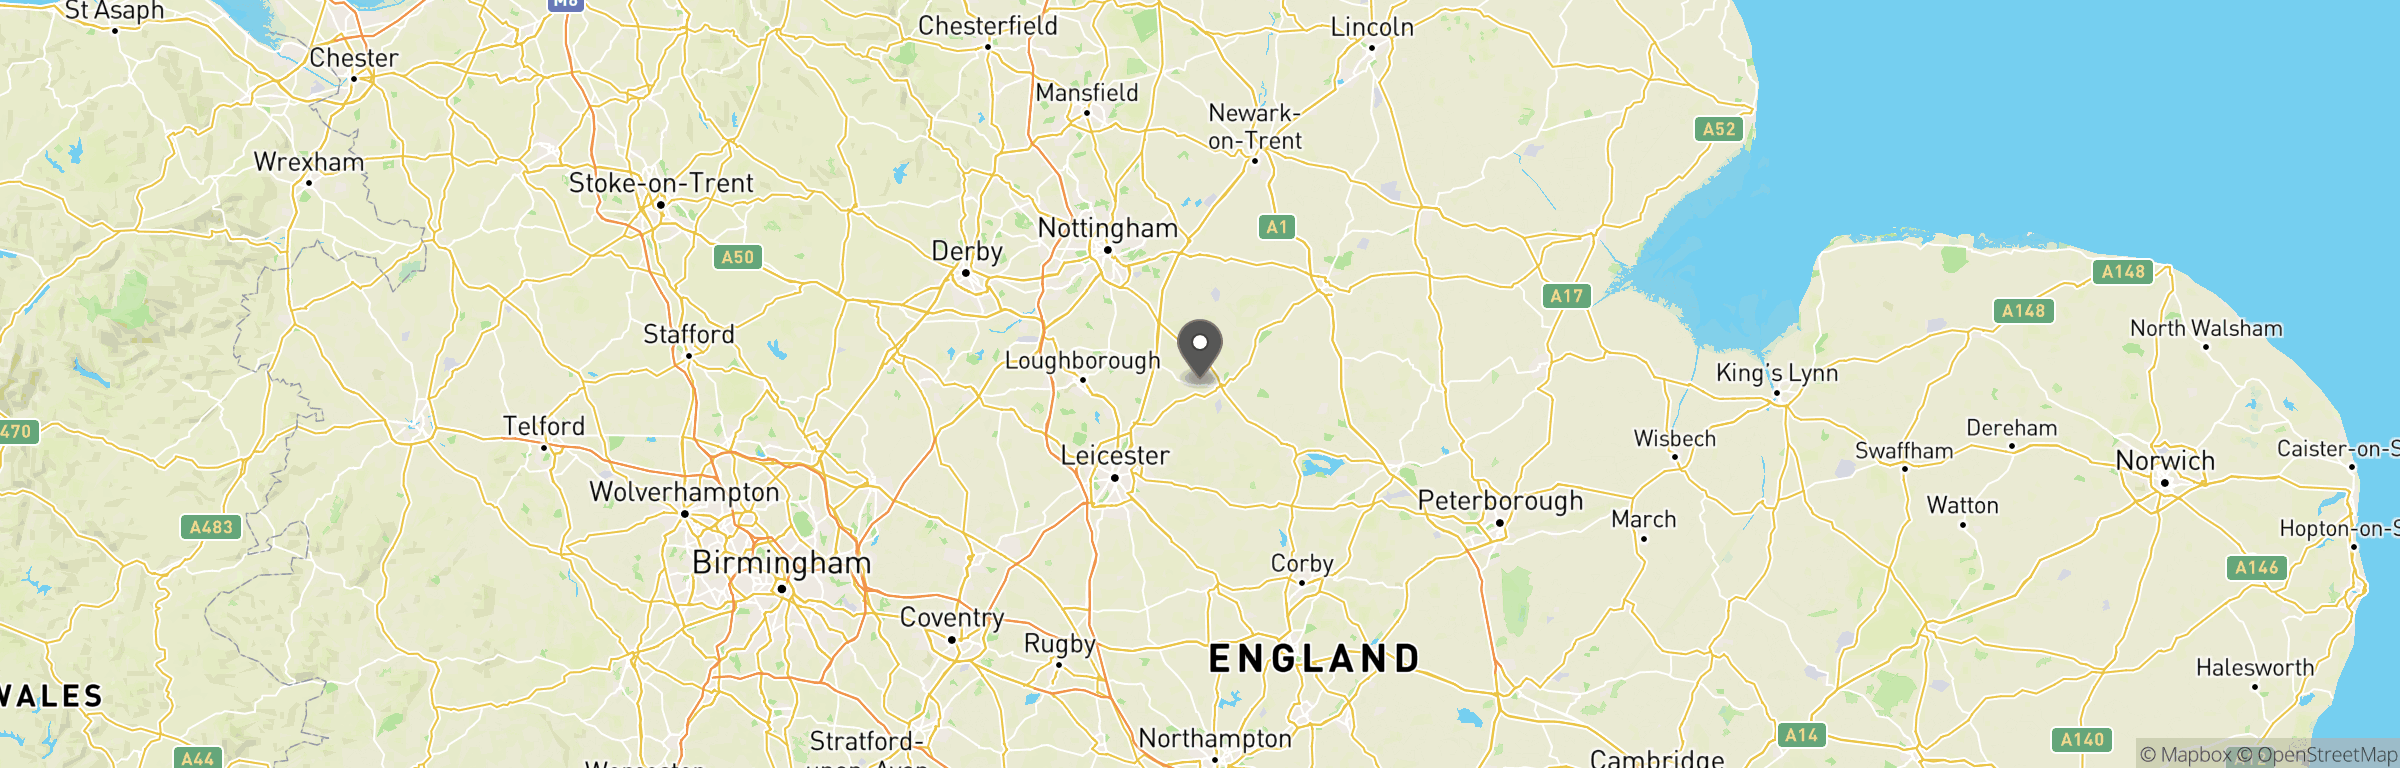 Location map of Midlands Airsoft Wargames